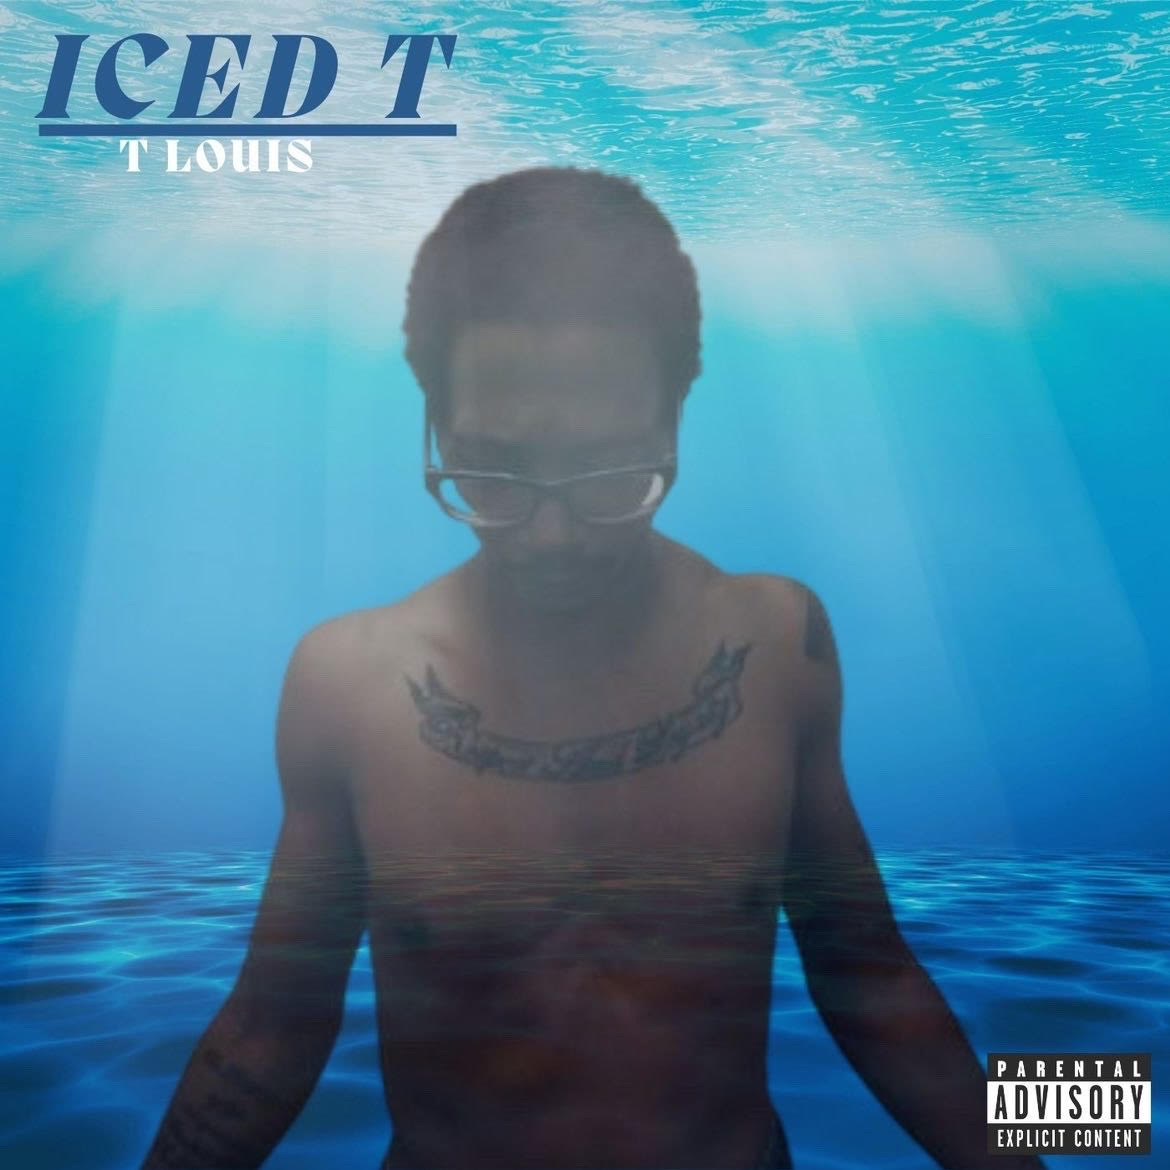 T Louis – “ICED T” (EP)